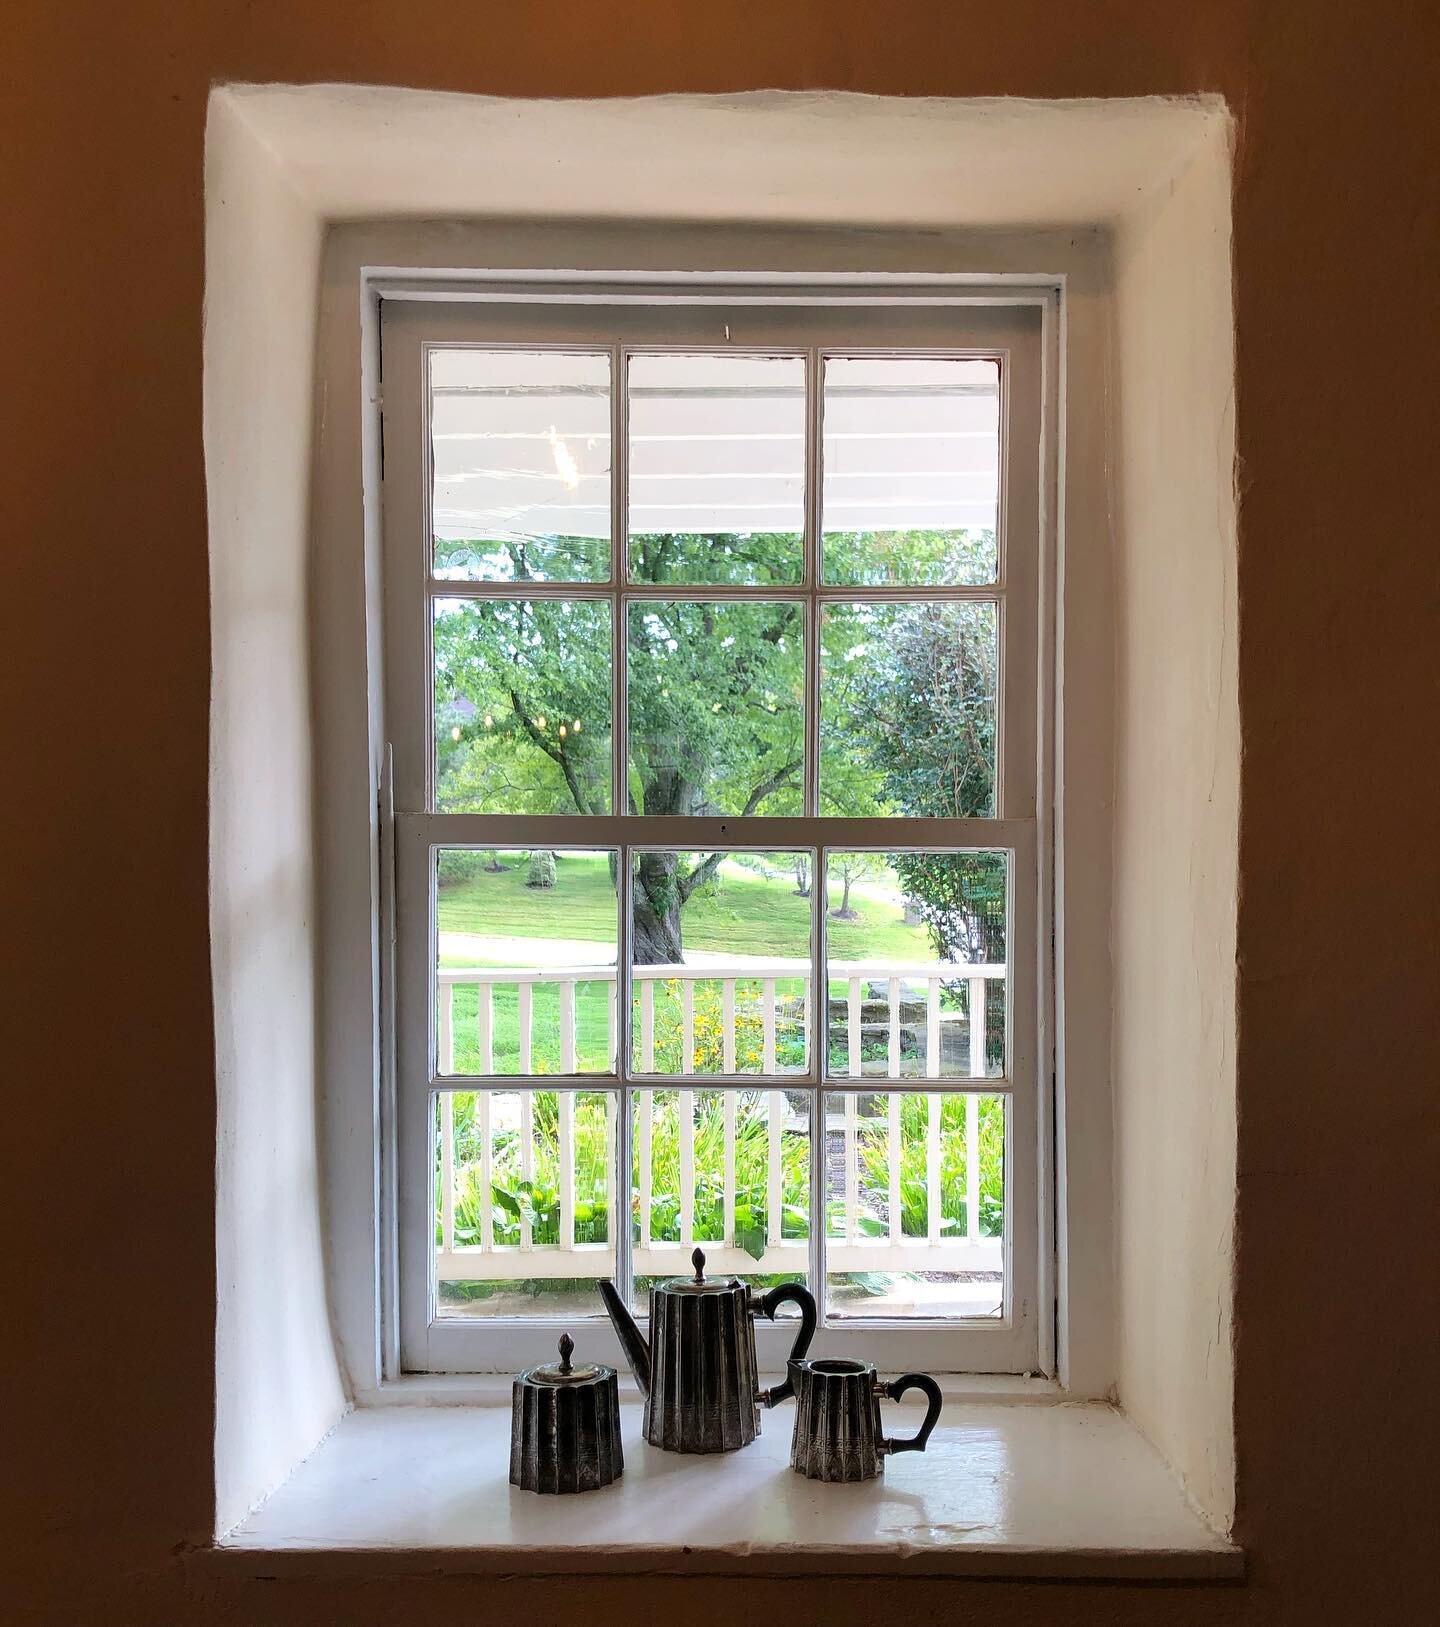 View from the kitchen at Shenstone Farmhouse. Looking to change scenery? Give me a call! #farmhouse #farmhousekitchen #antiquehome #antiquefarmhouse #realestate #forsale #loudoun #loudouncounty #leesburgva